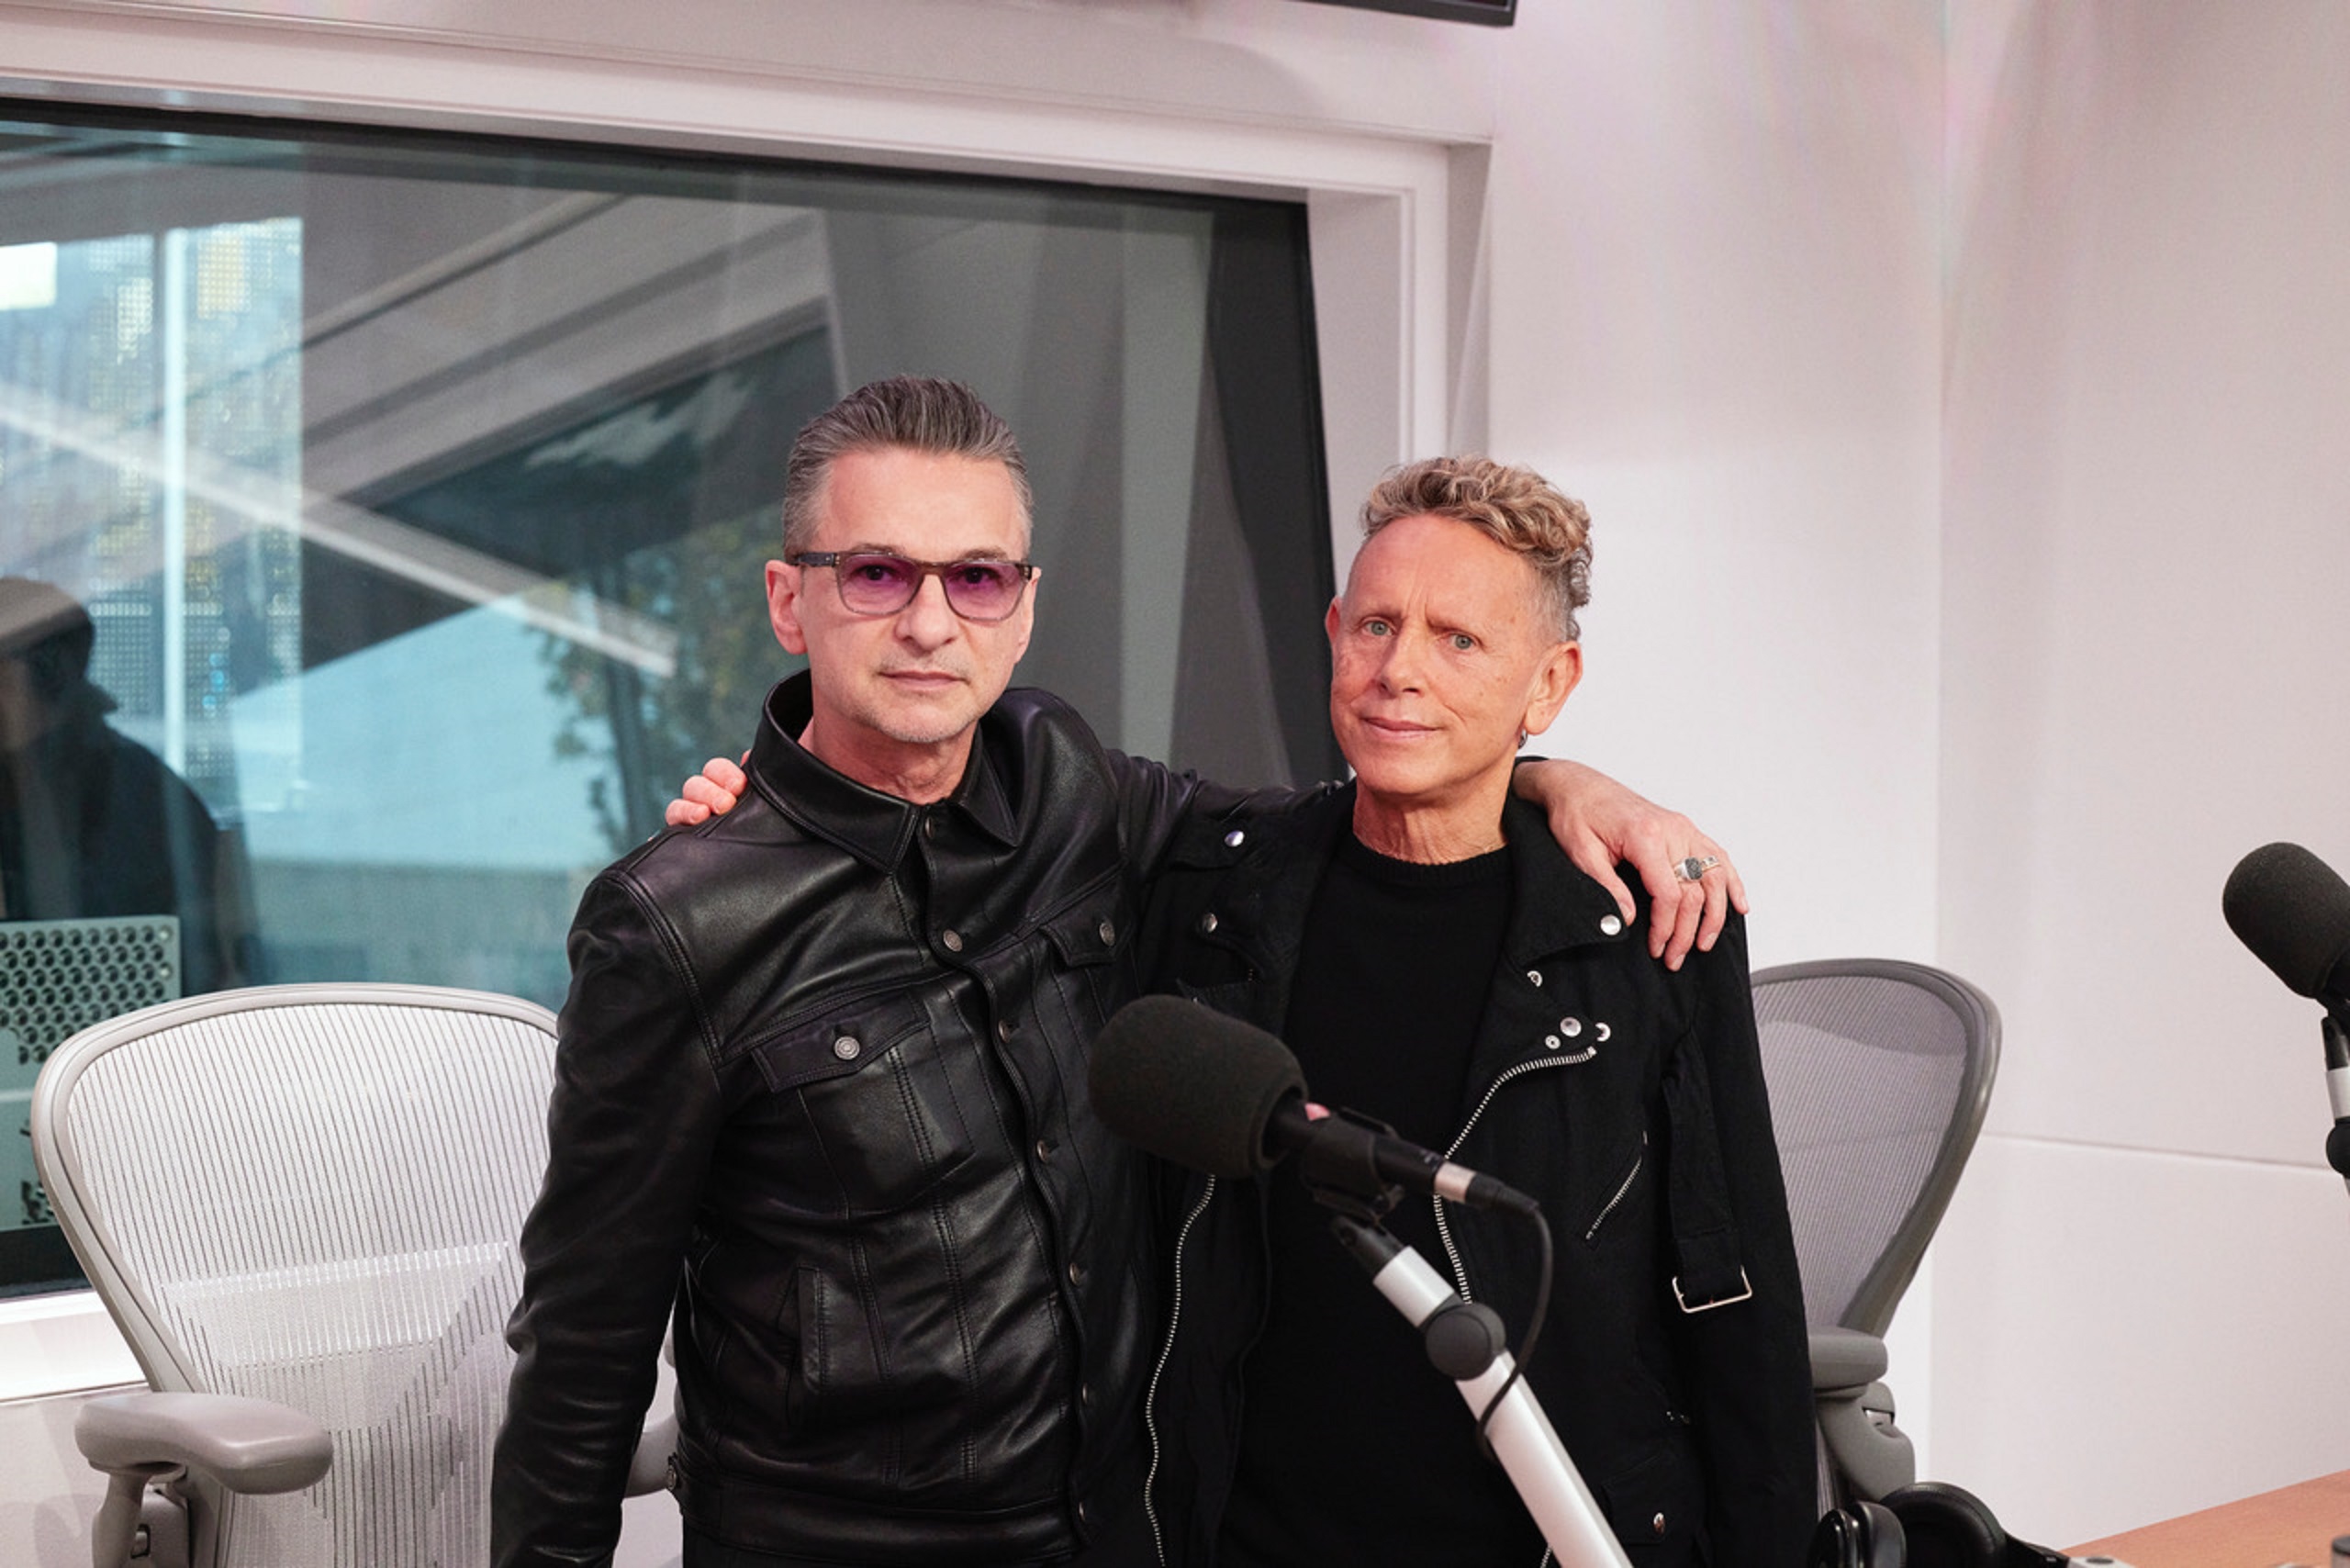 Depeche Mode releases first song 'Ghosts Again' since passing of